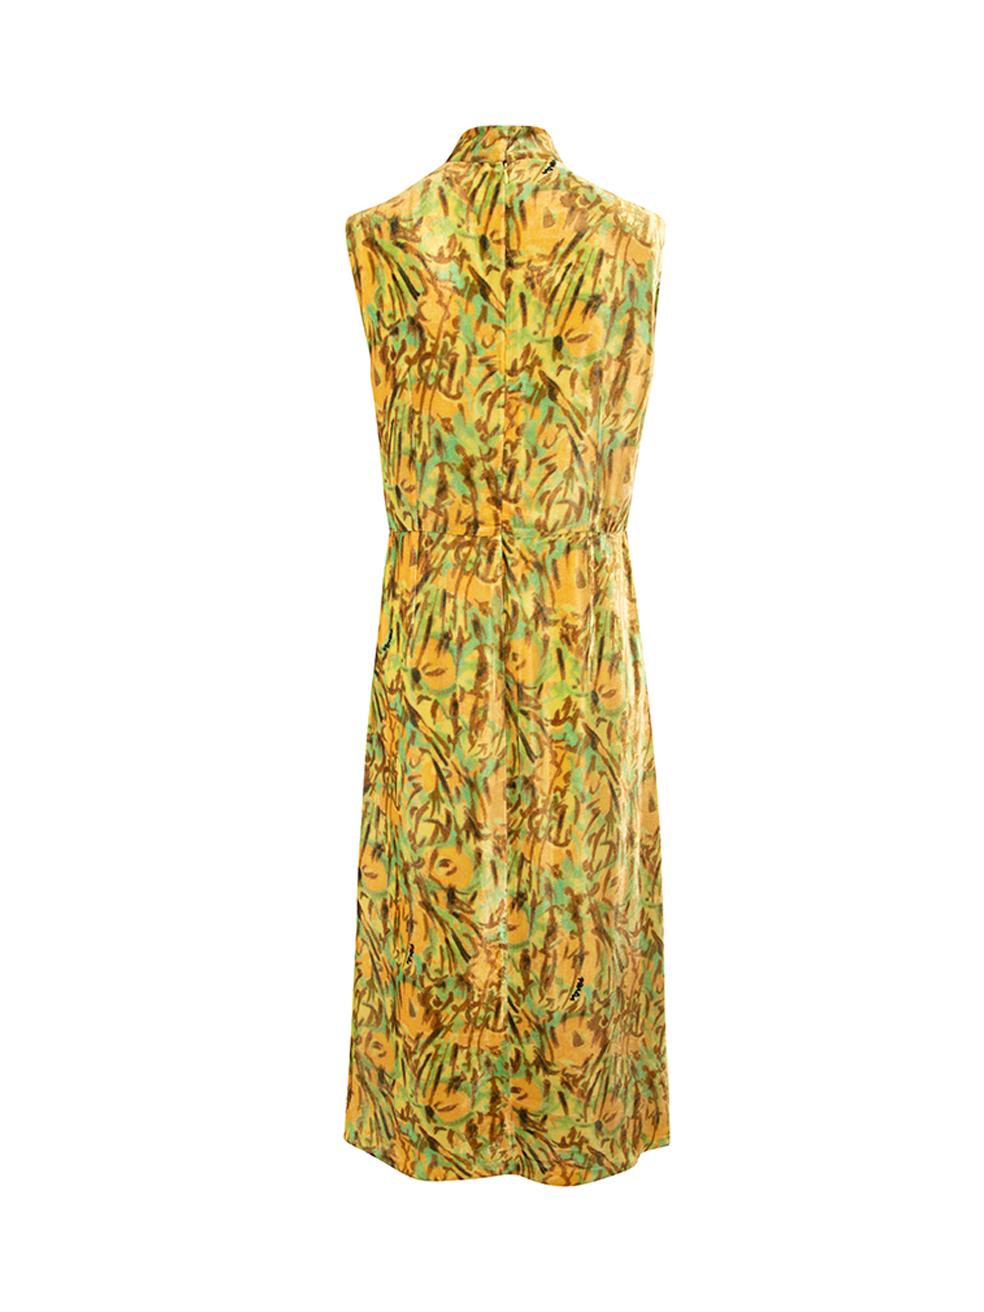 CONDITION is Very good. Hardly any visible wear to dress is evident on this used Prada designer resale item. Details Multicolour- Yellow and green Velvet Midi dress Abstract pattern Mock neckline Back zip closure with hook and eye Fully lined Made